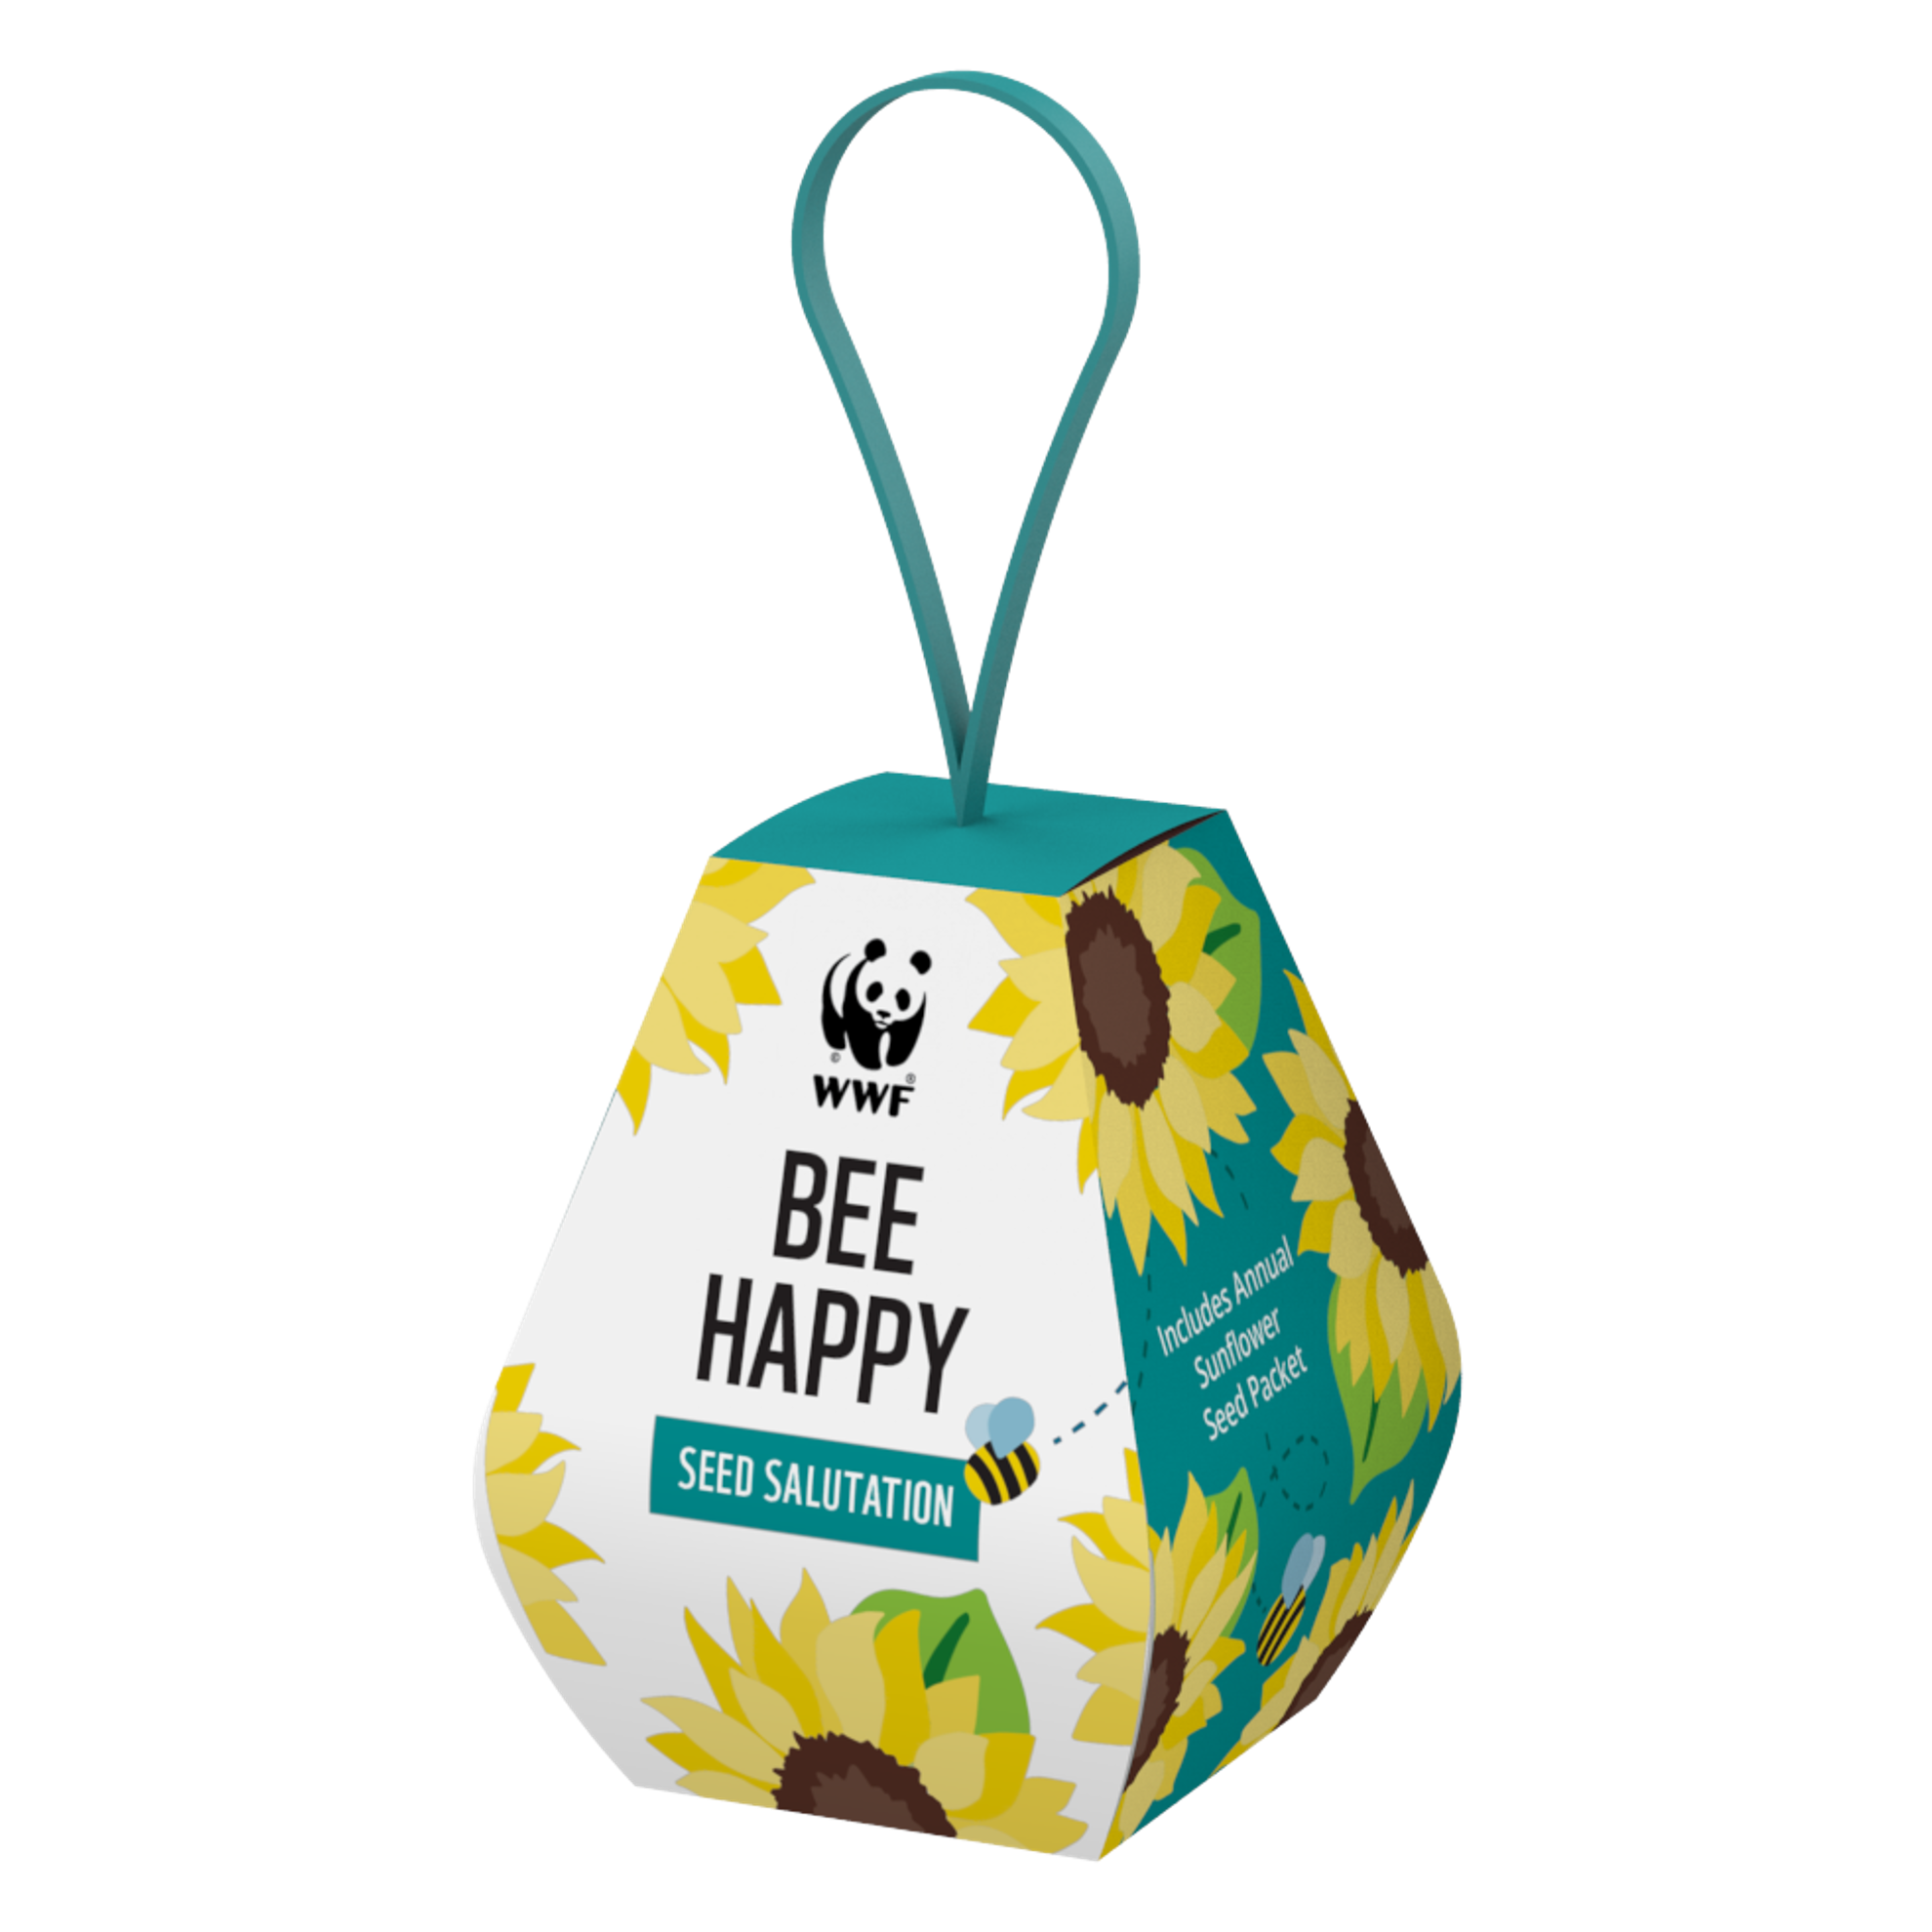 Sunflower seed pack - WWF-Canada